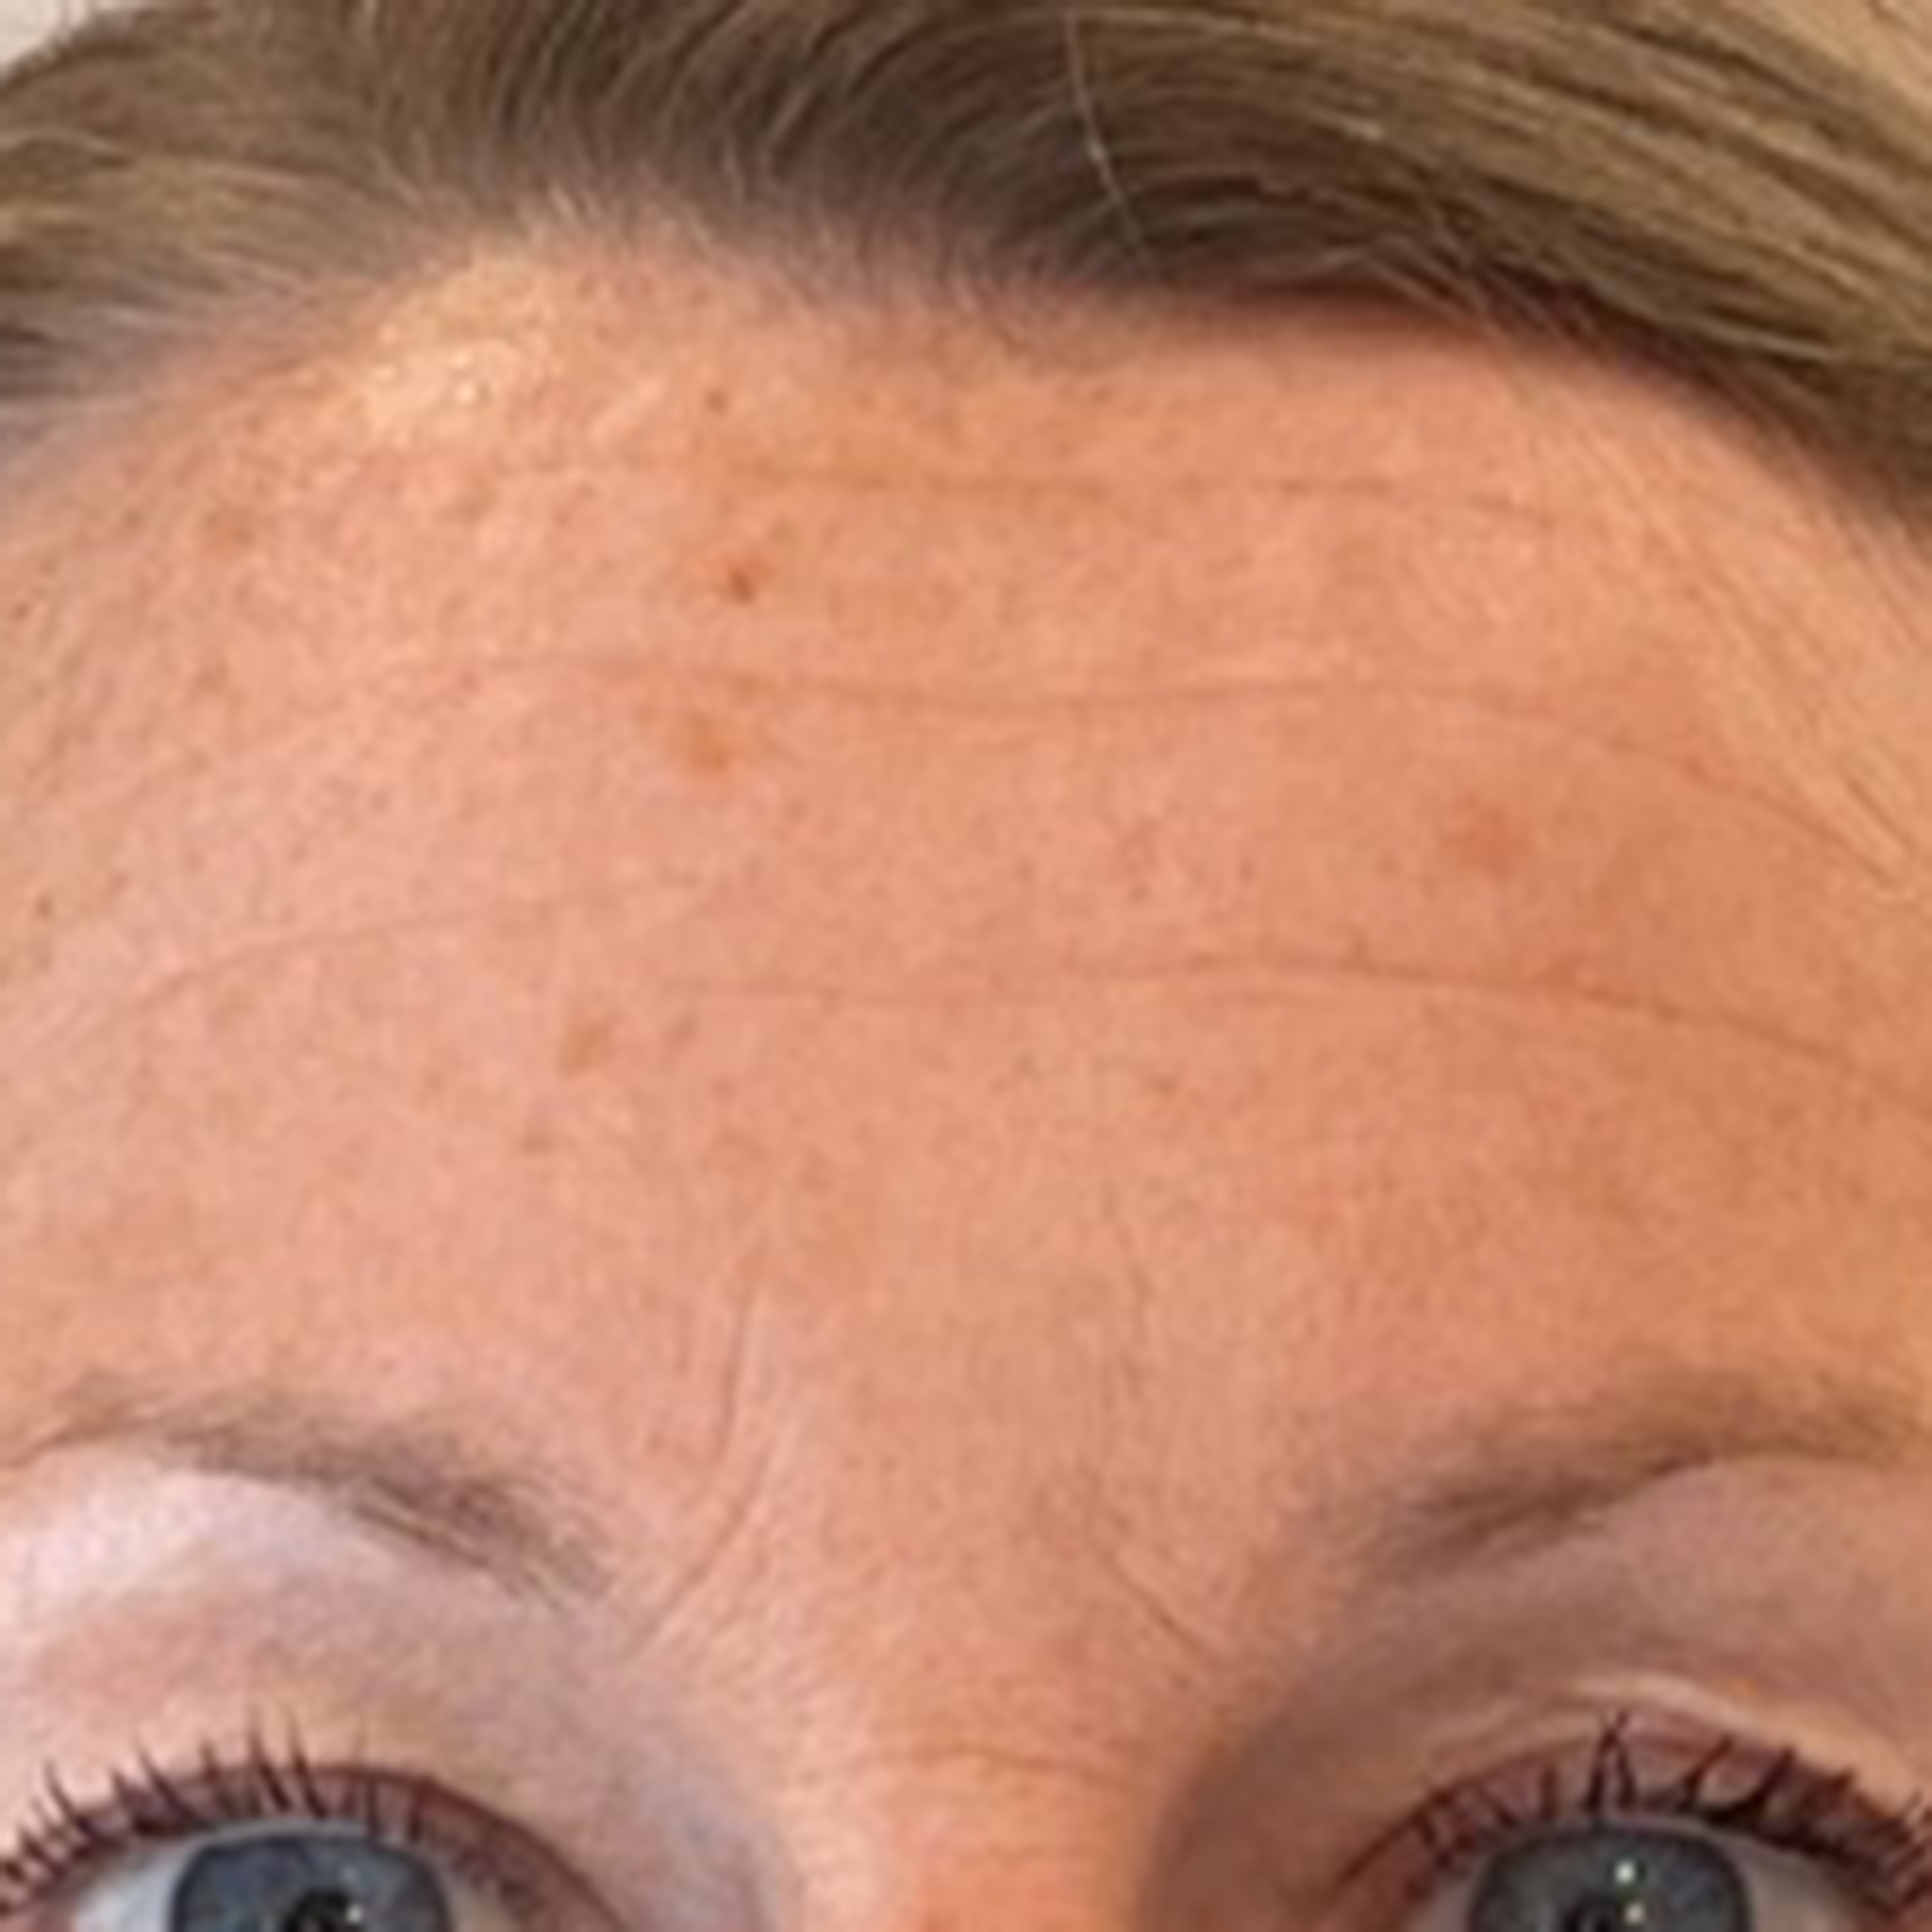 Before Botox Treatment on Forehead Lines